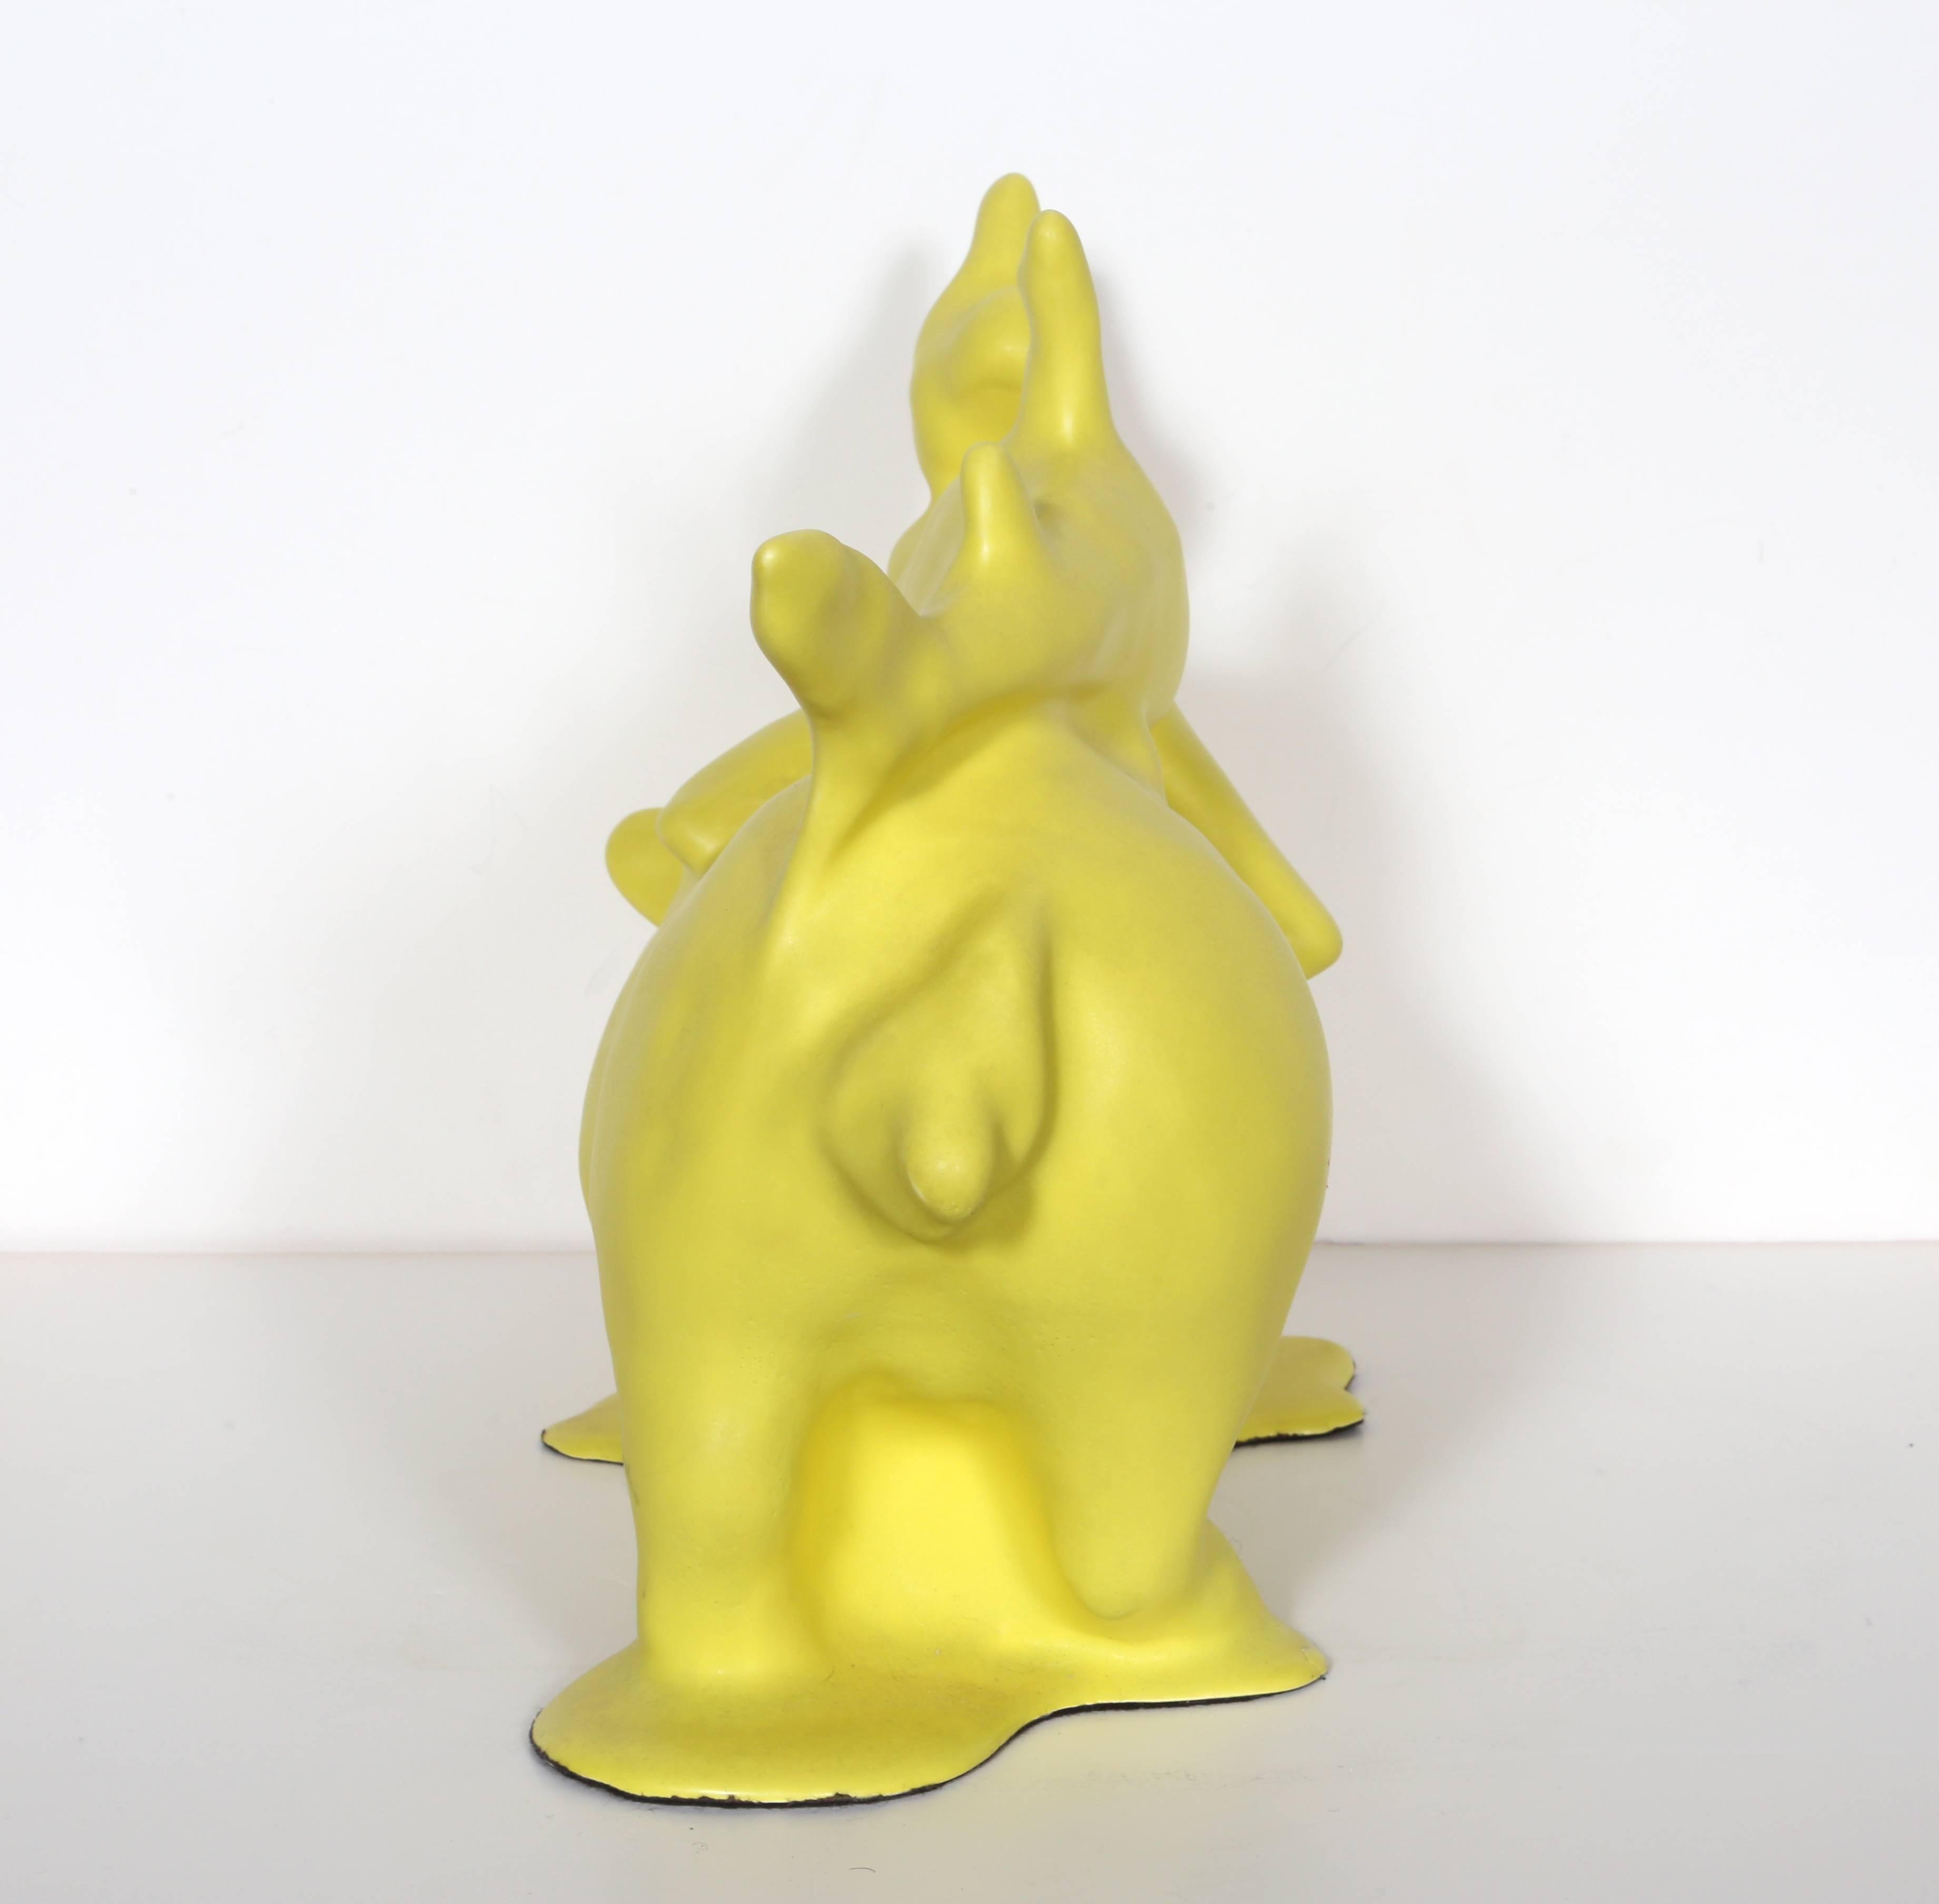 Artist: Bertjan Pot, Dutch (b. 1975)
Title: Pig, Shark, Chicken from The Gathering
Year: 2007
Medium: Yellow Stoneware with Magnet, signature, date, title, and stamp printed, hand-numbered
Edition: 30/100
Size: 12.5  x 17.5  x 6 in. (31.75  x 44.45 